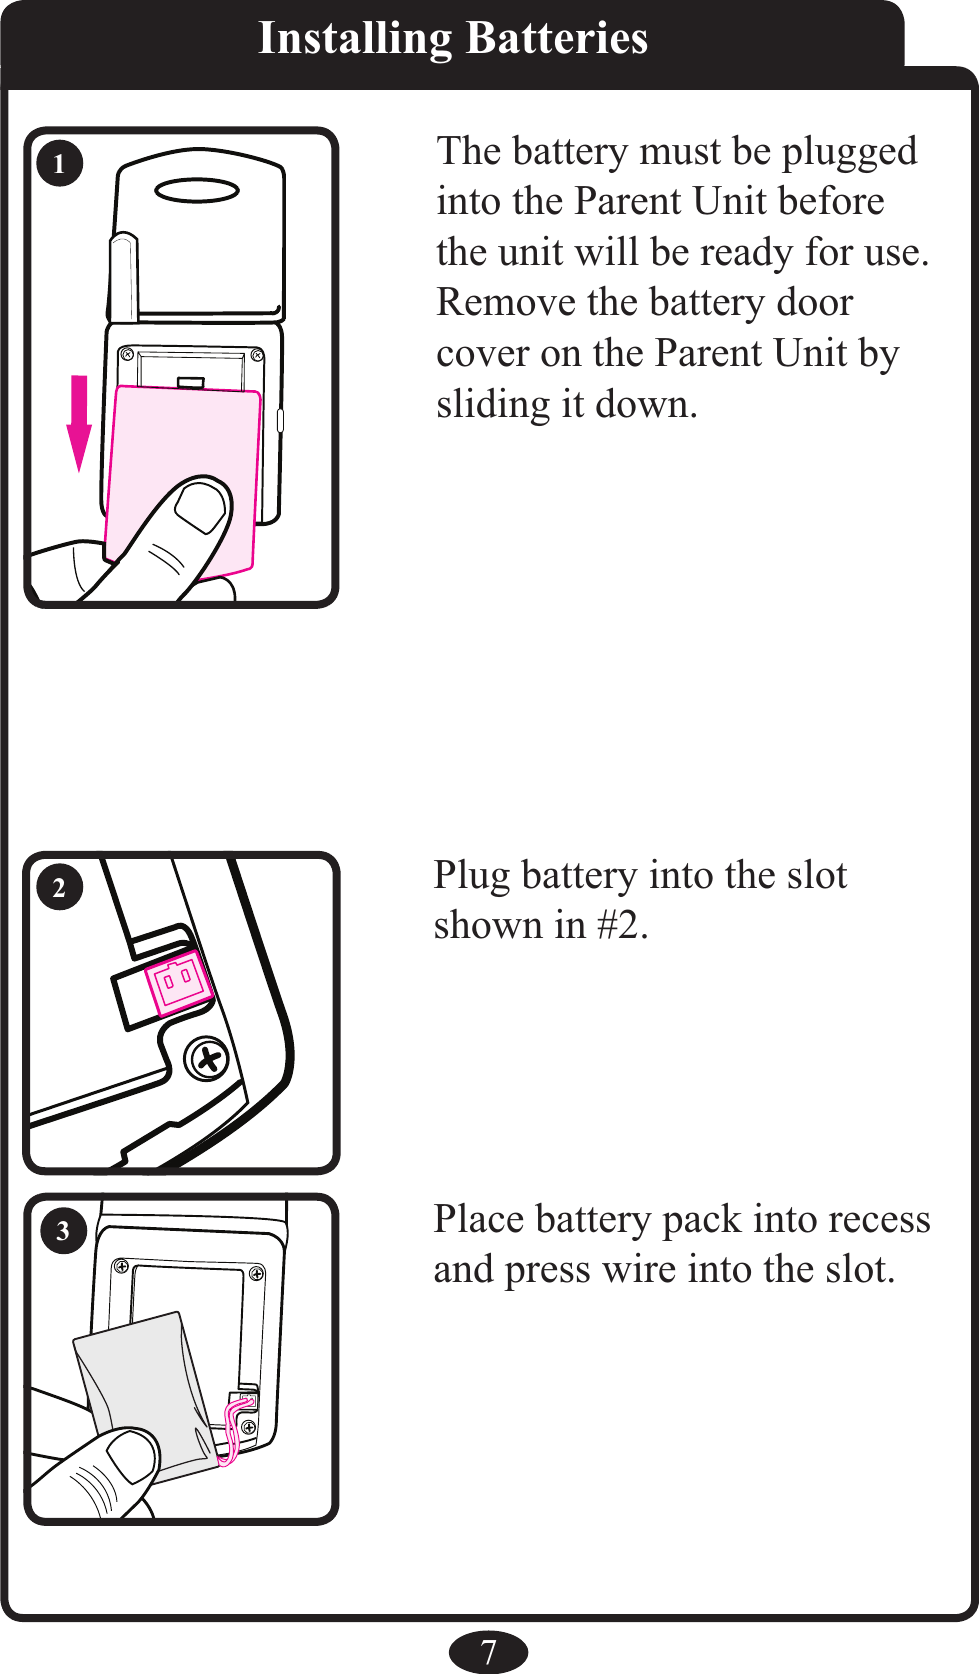              7Installing BatteriesThe battery must be plugged into the Parent Unit before the unit will be ready for use. Remove the battery door cover on the Parent Unit by sliding it down.Place battery pack into recess and press wire into the slot.Plug battery into the slot shown in #2. 123